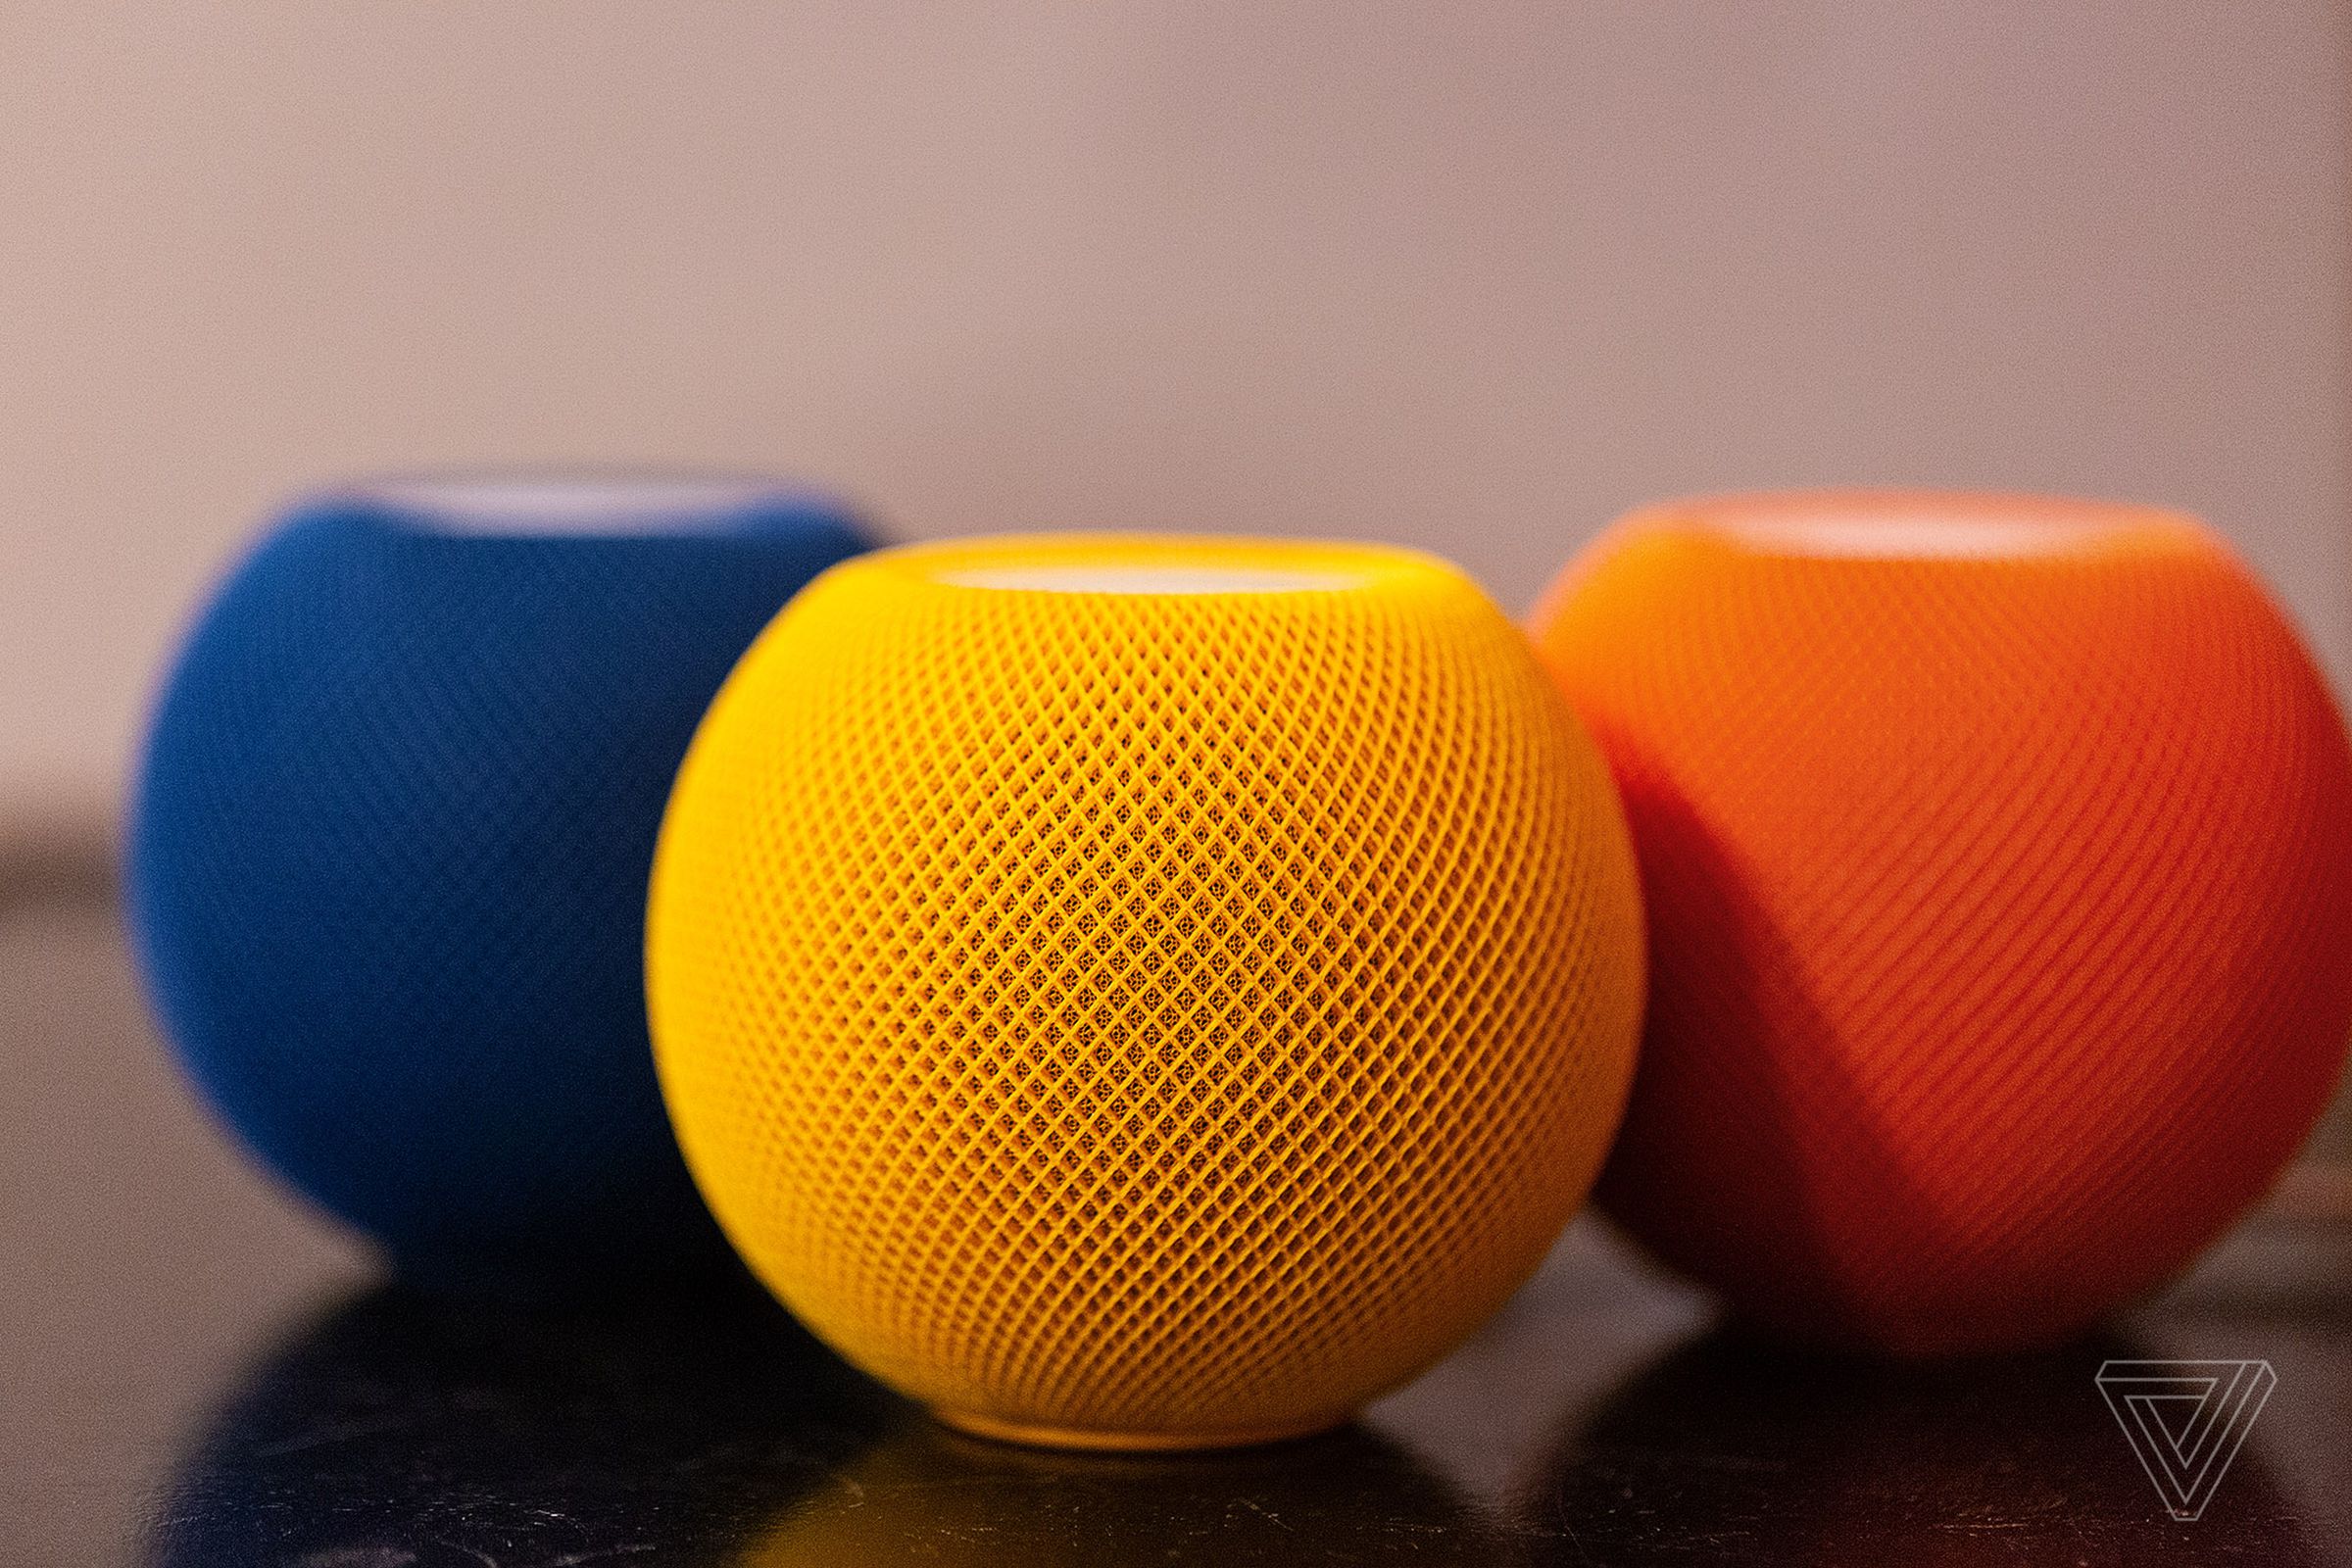 Three of Apple’s HomePod Mini smart speakers standing on a desk in various shades including orange, yellow, and blue.